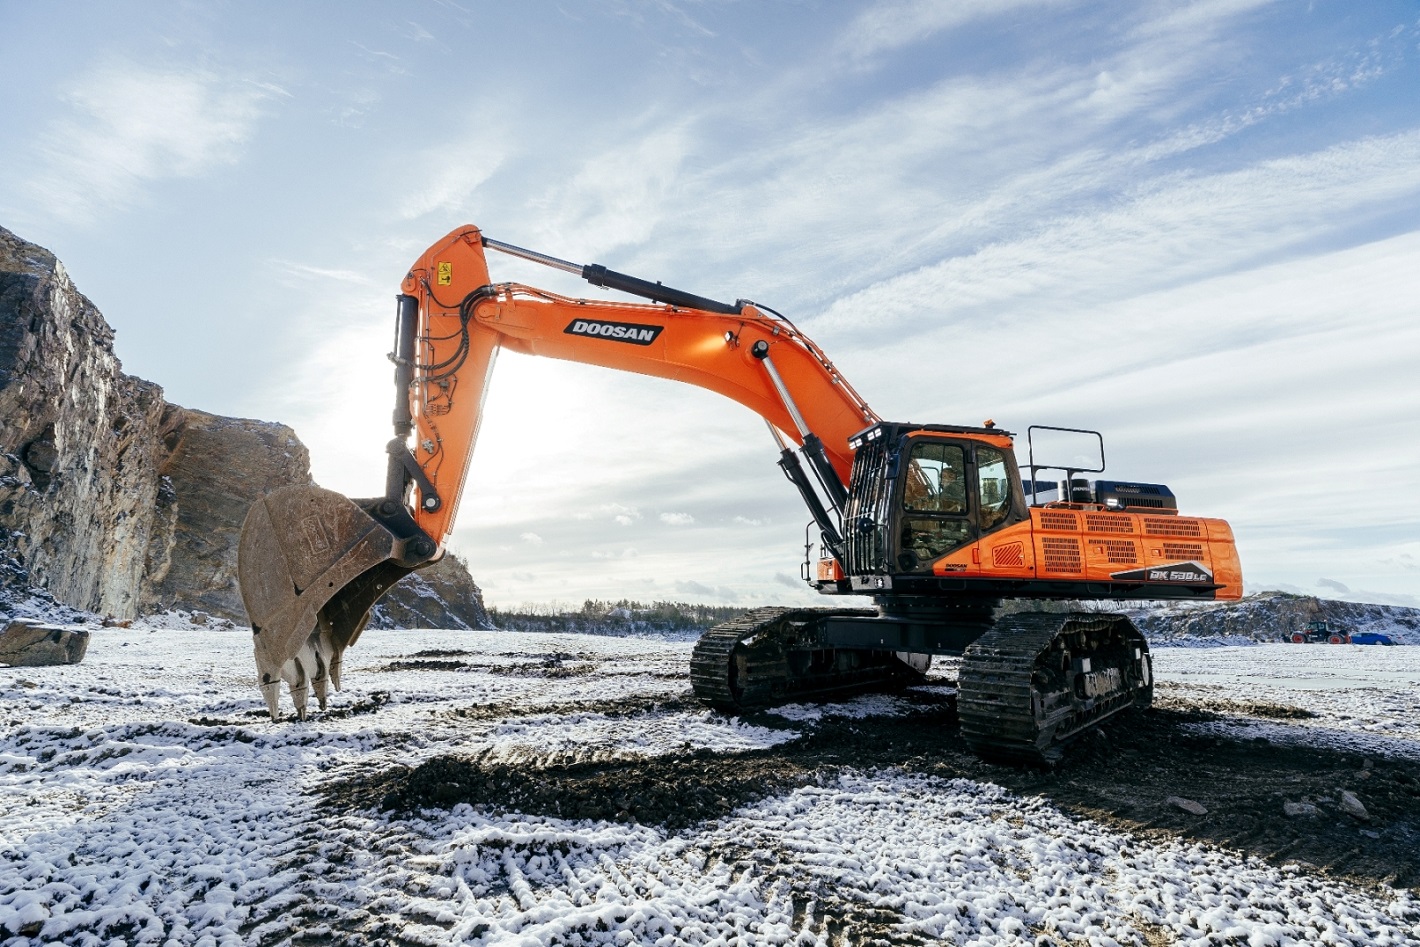 The 53-tonne DX530LC-7 excavator will be on show in the UK for the first time